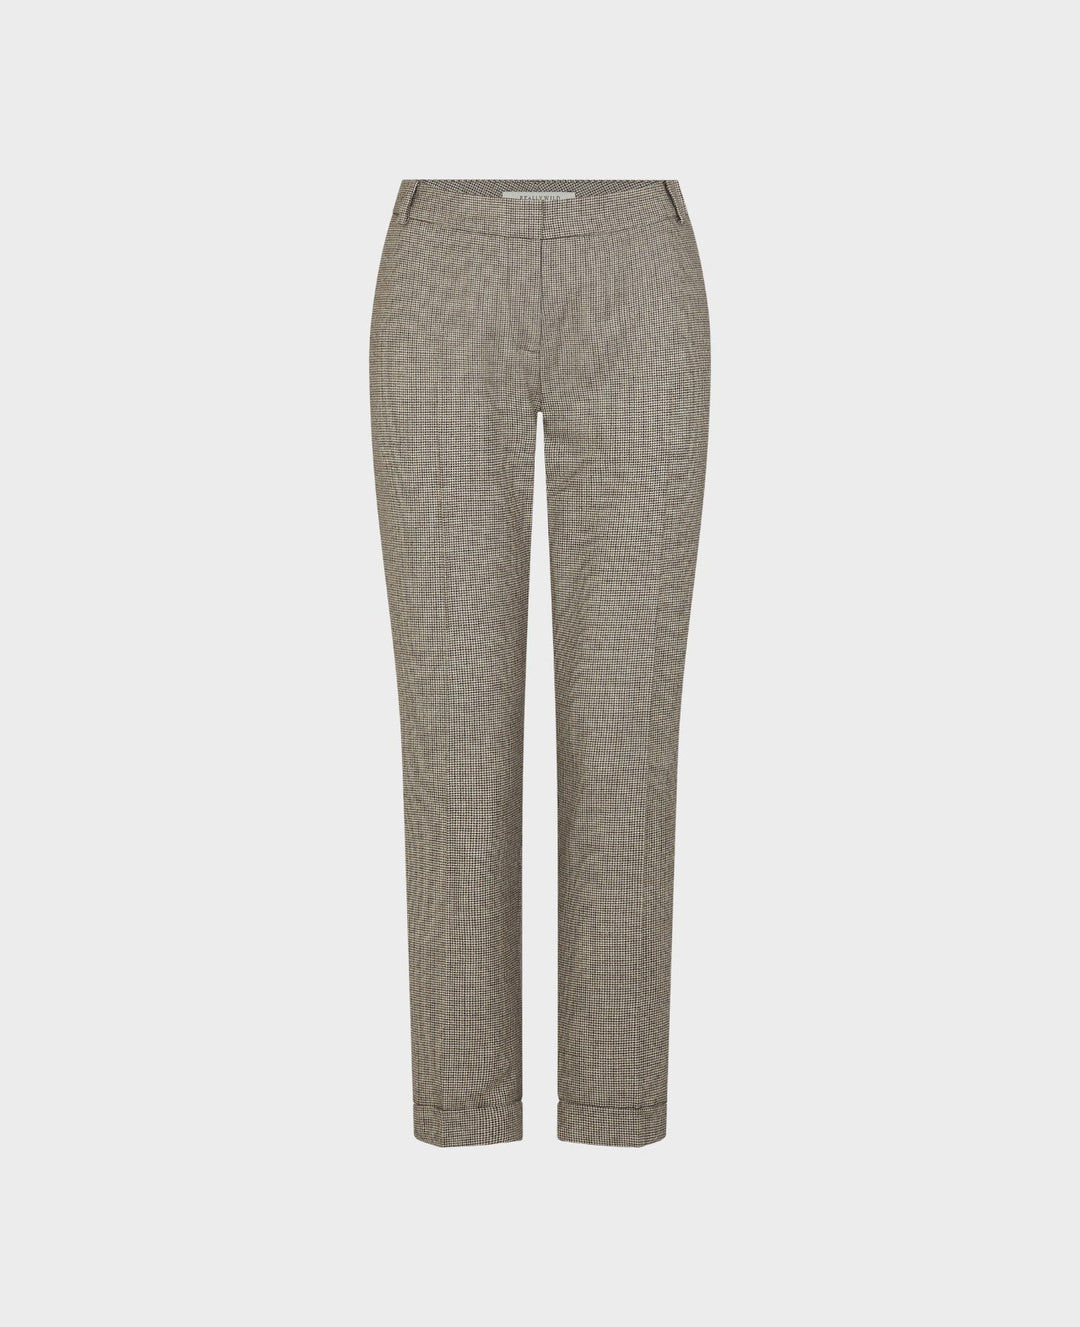 Turn Up Trousers Navy Brown Dogtooth